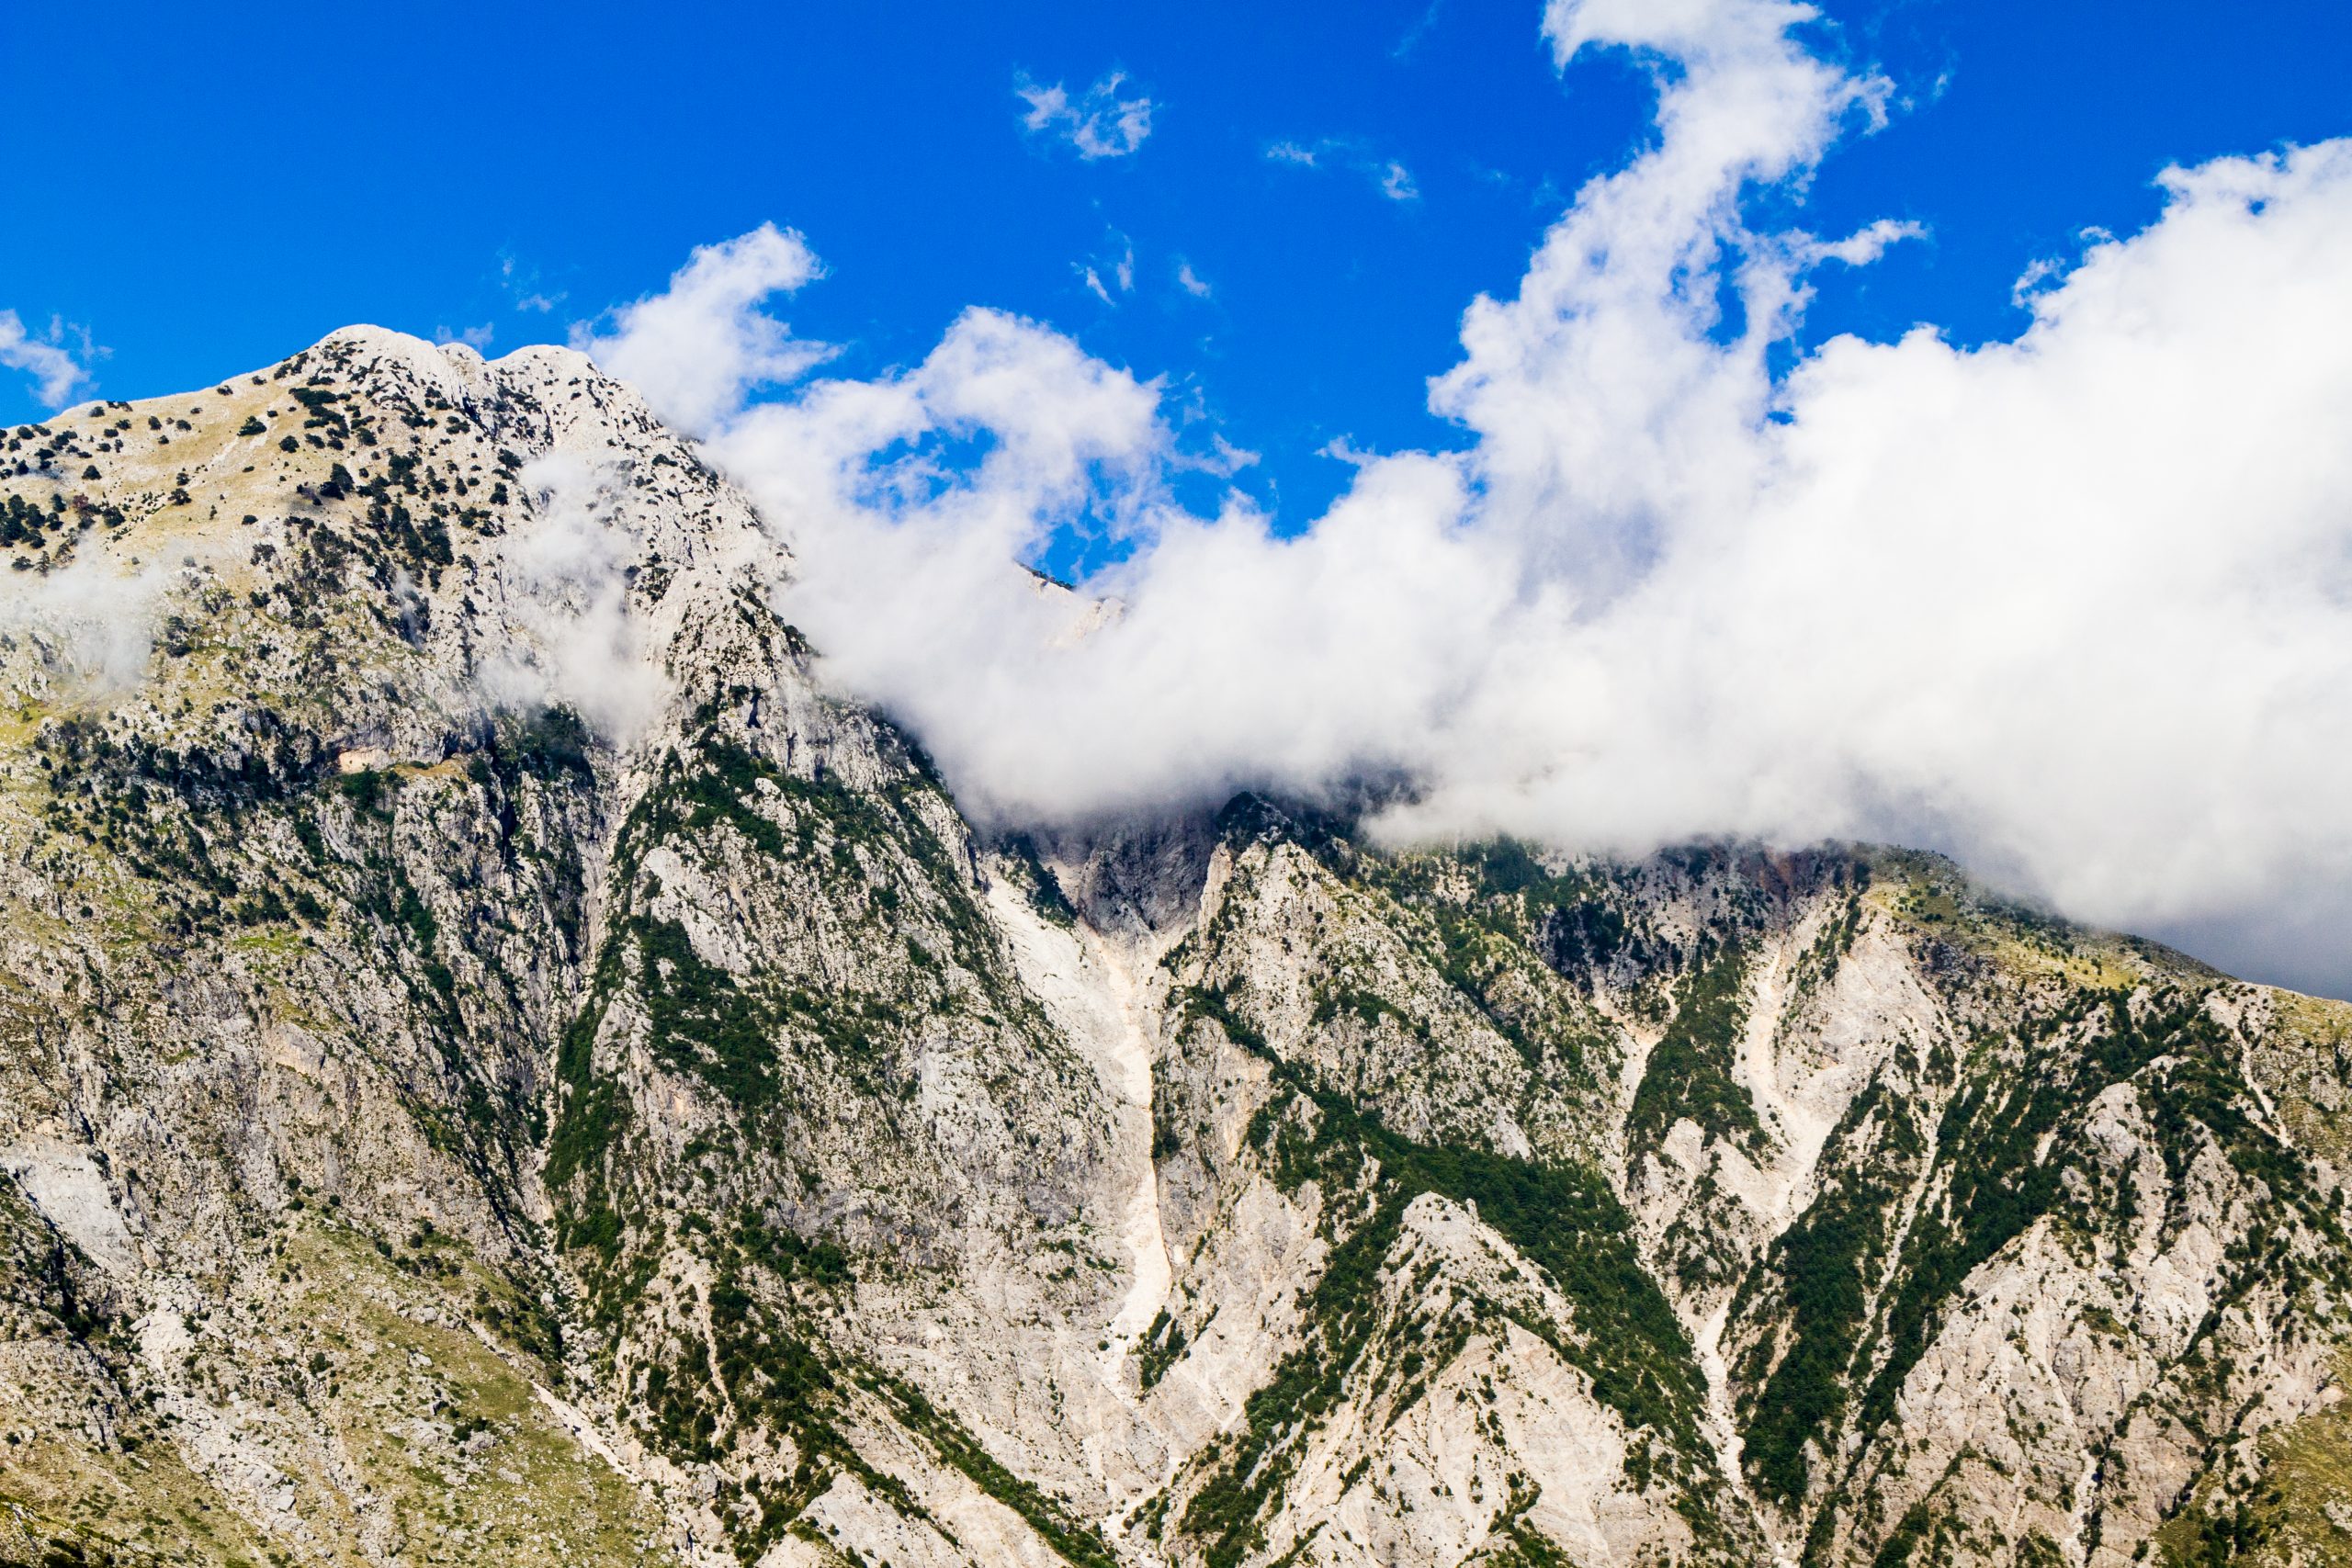 Albanian mountain photo from royalty-free stock photo site